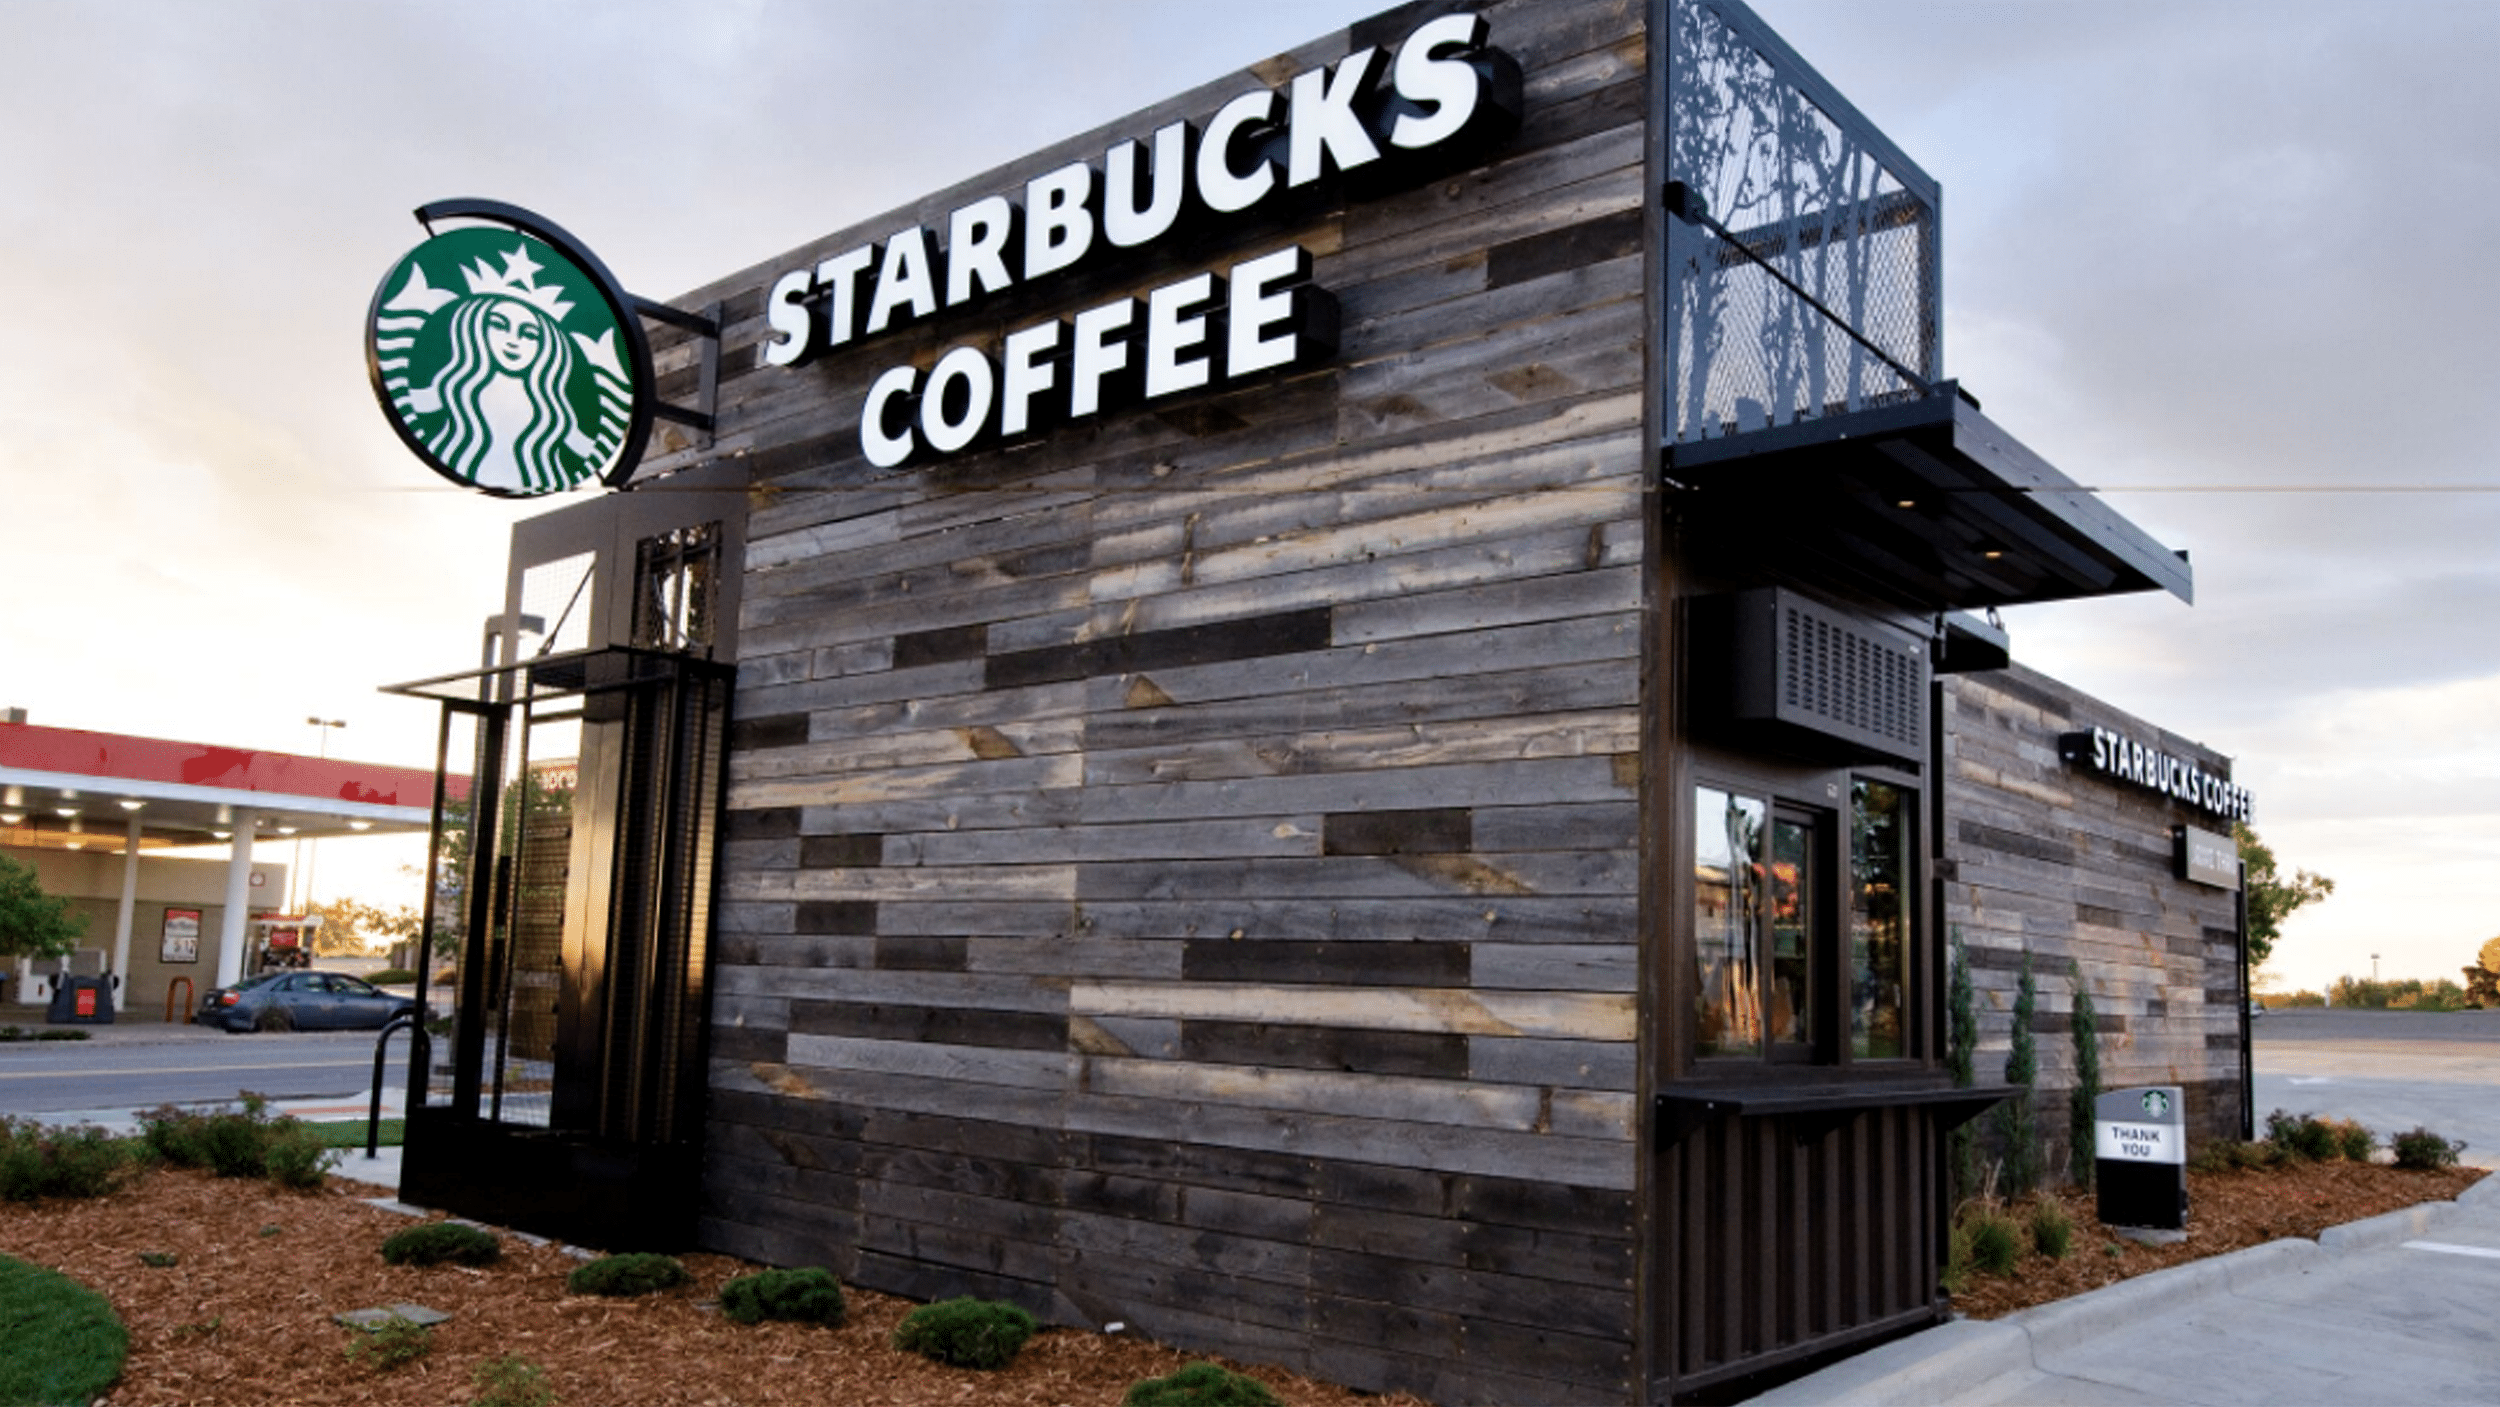 Starbucks' shipping container cafes are gaining steam. Retrieved from https://www.today.com/home/starbucks-shipping-container-cafes-are-gaining-steam-t124032